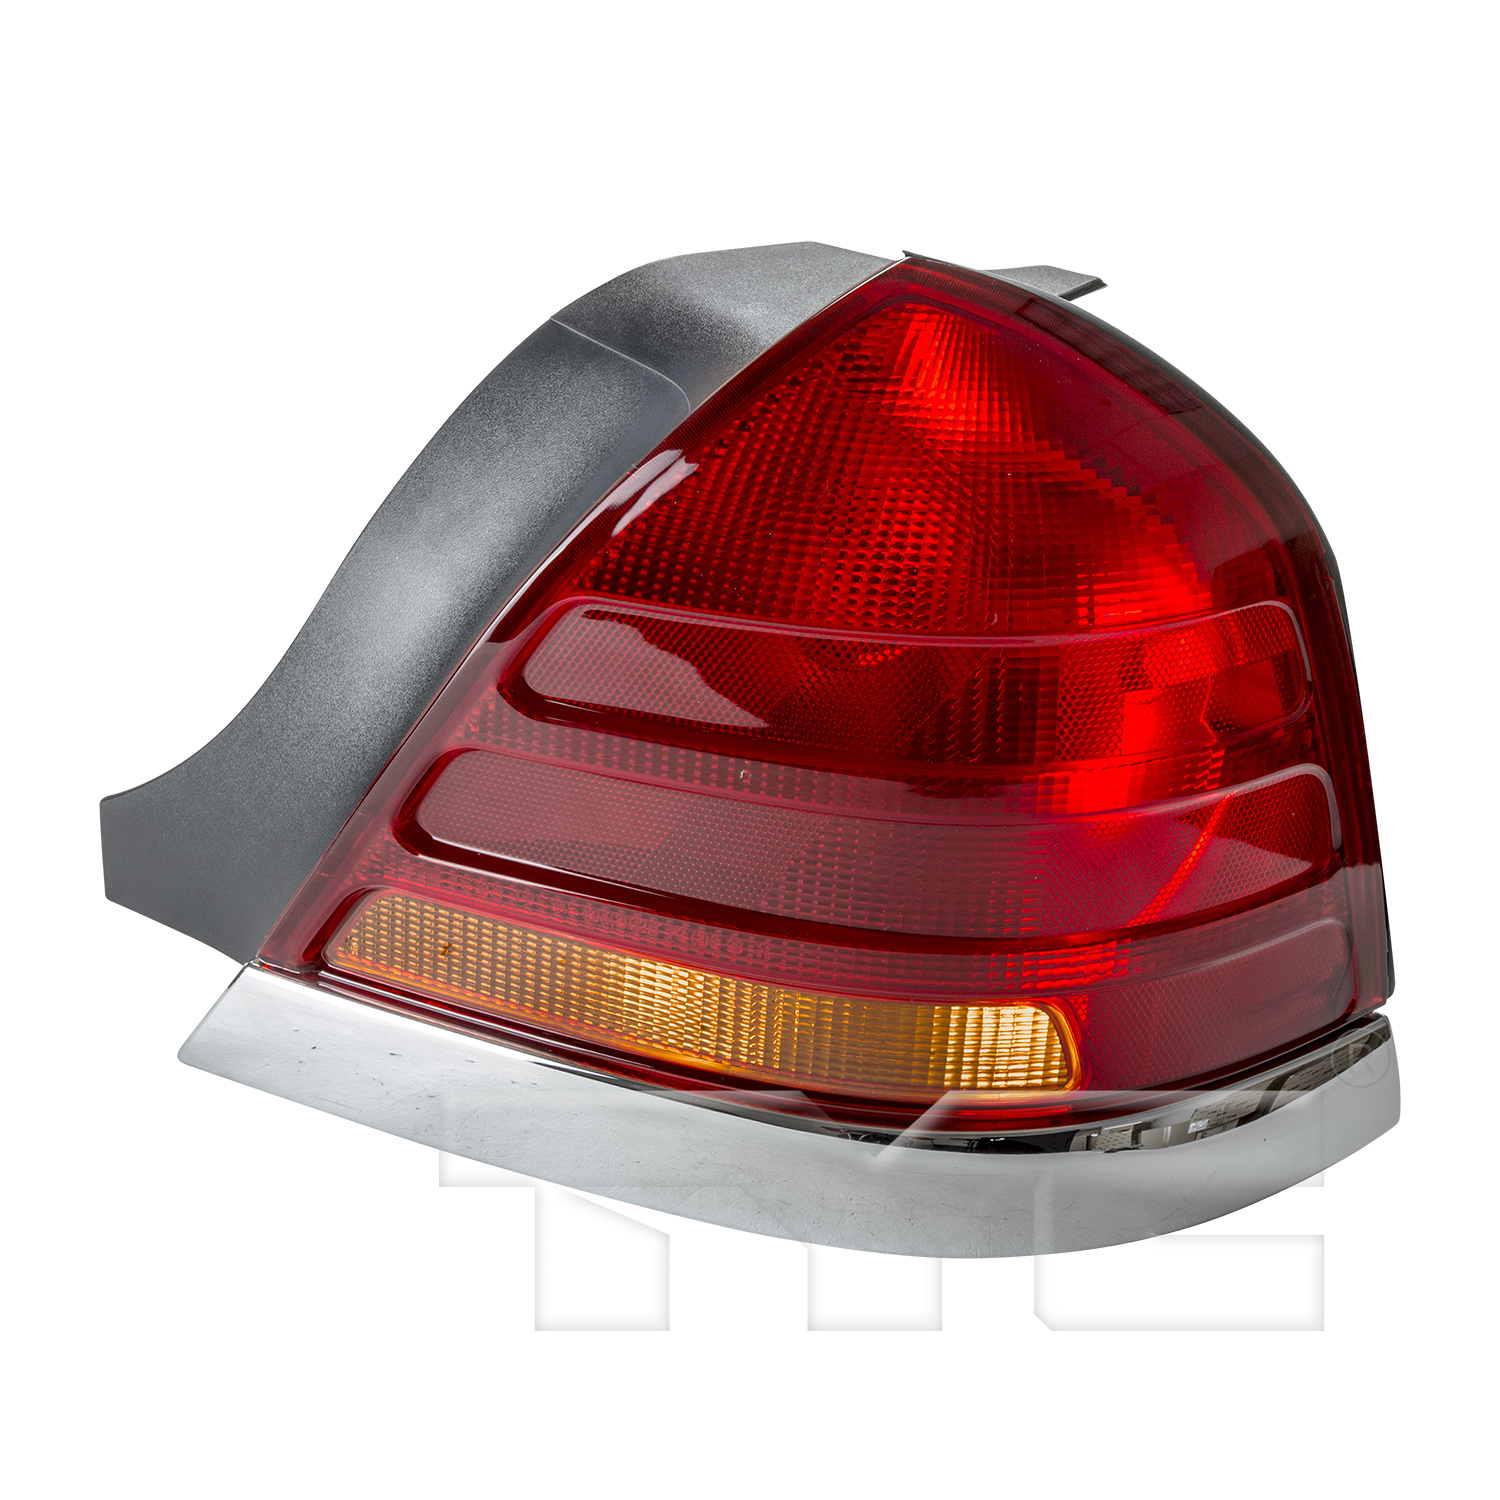 Aftermarket TAILLIGHTS for FORD - CROWN VICTORIA, CROWN VICTORIA,99-00,RT Taillamp assy